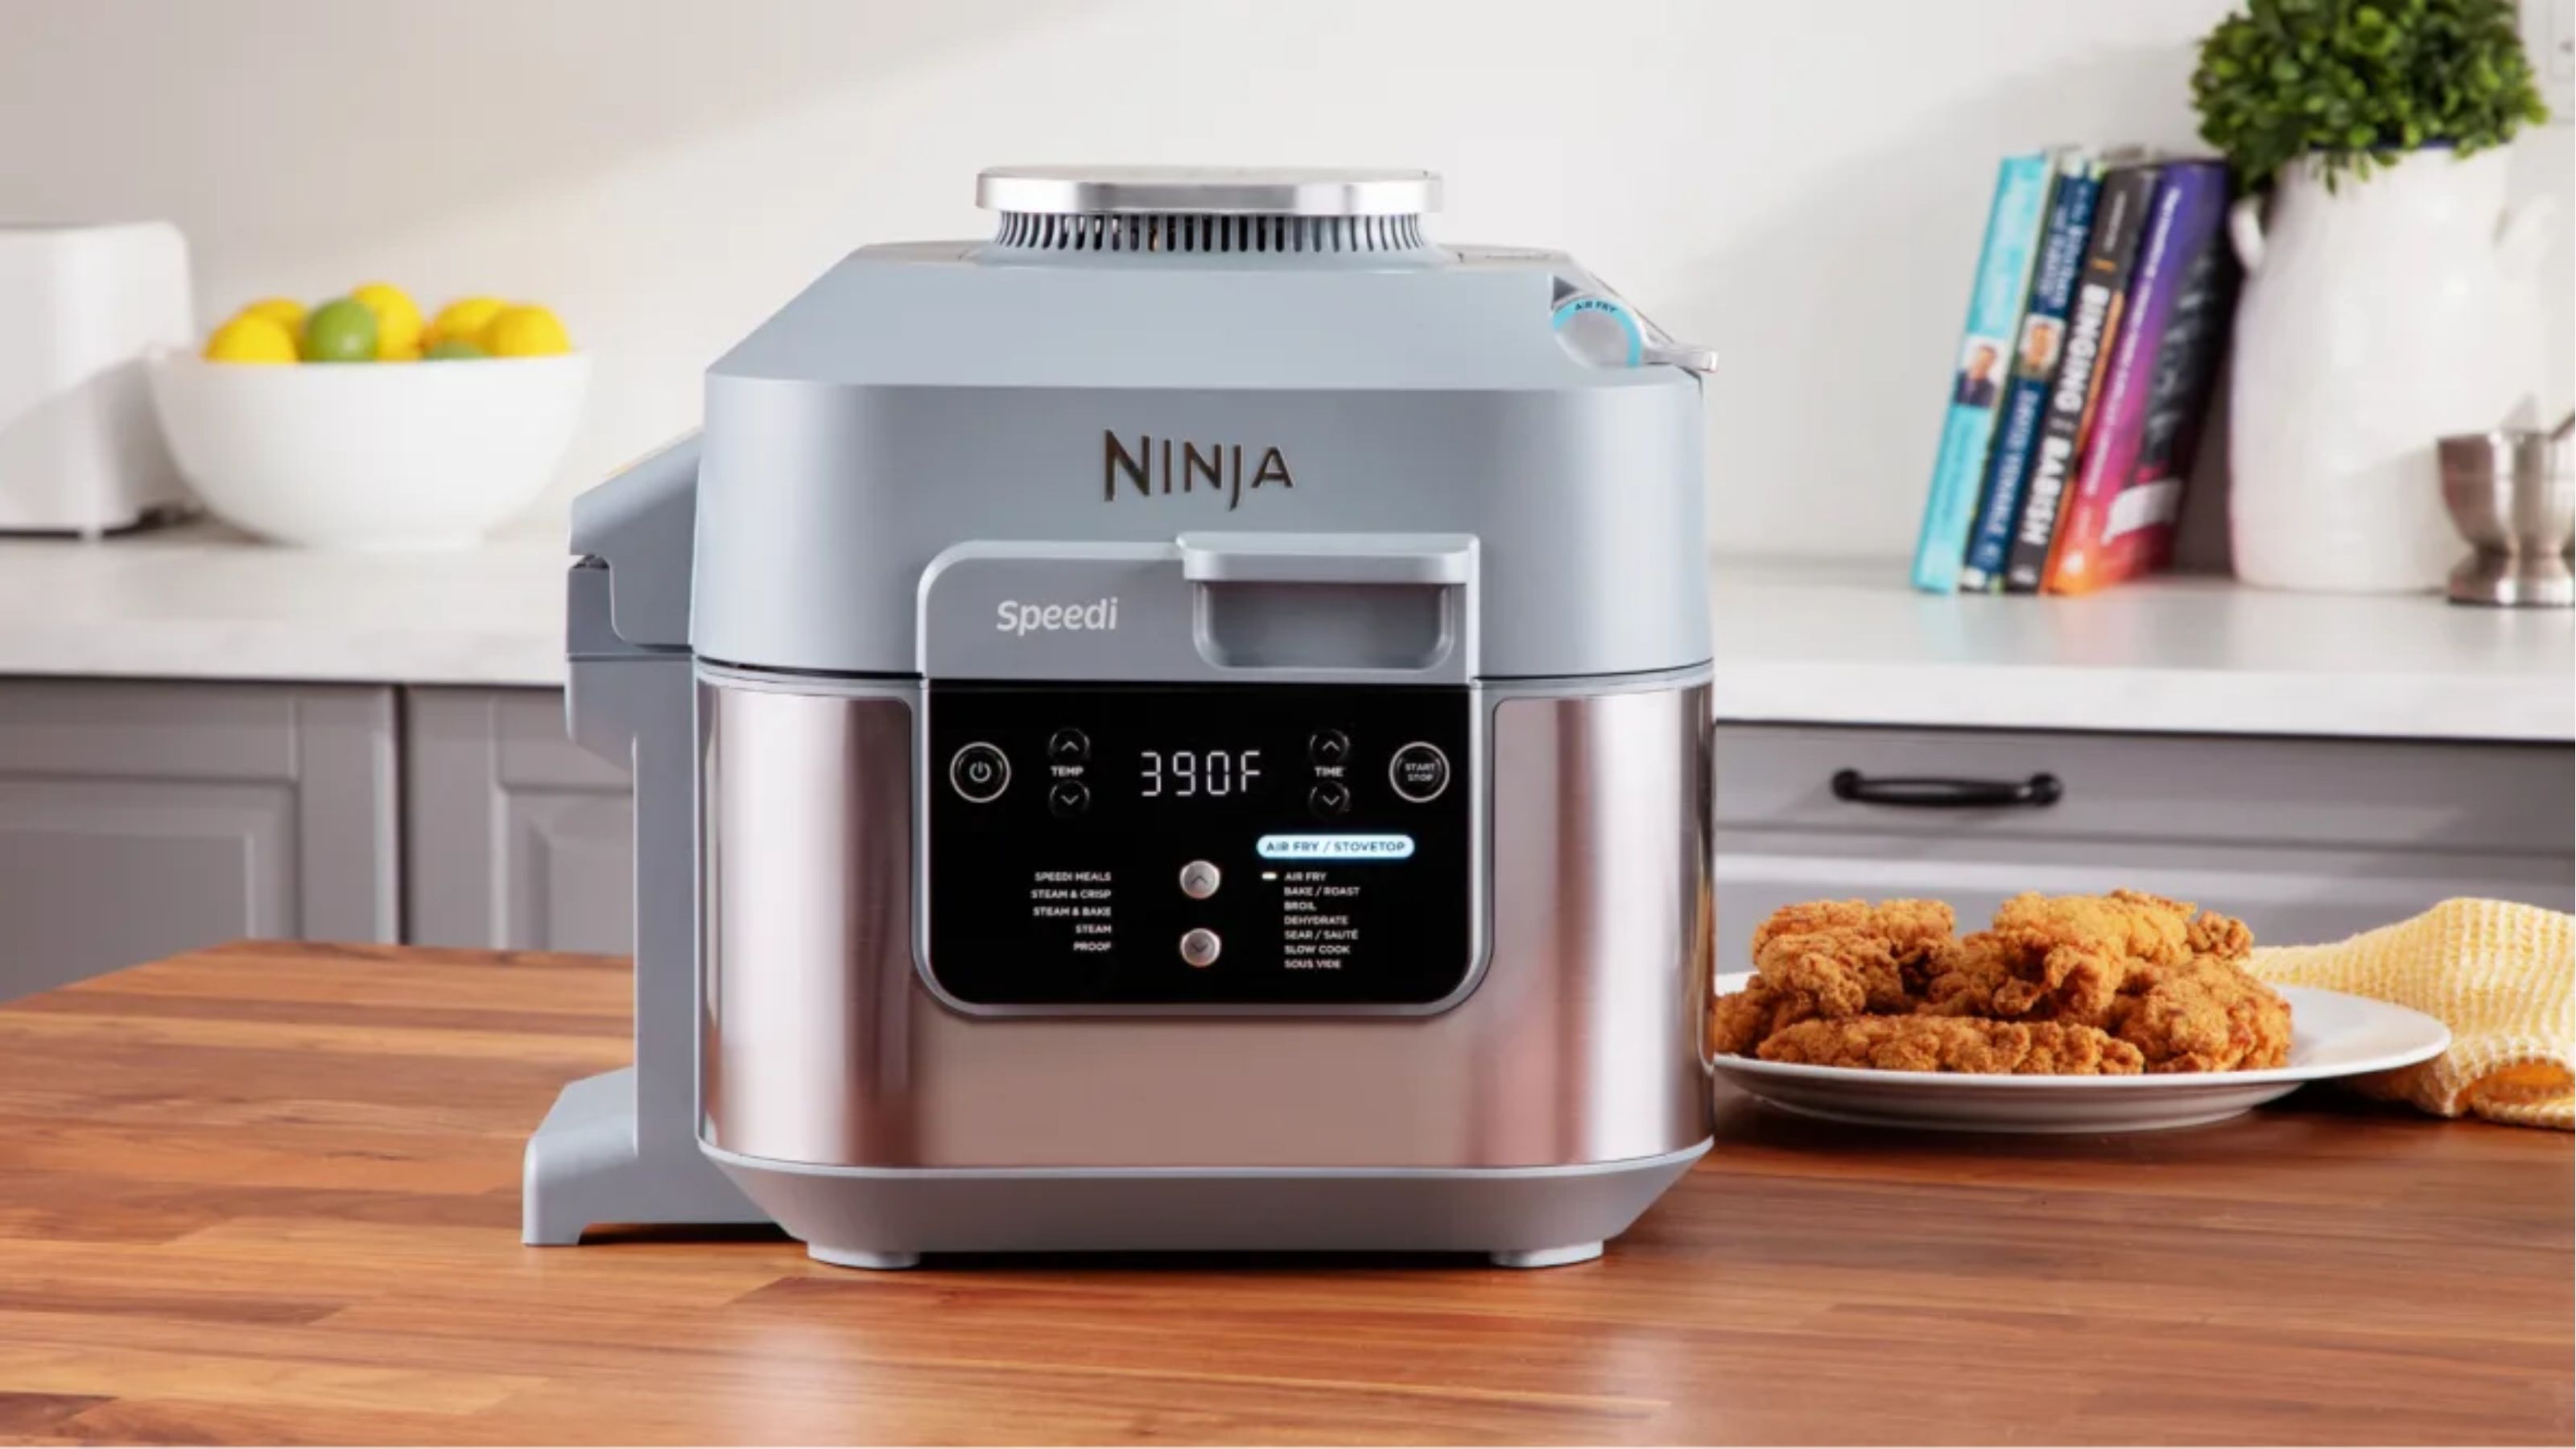 NEW NINJA SPEEDI REVIEW UNBOXING AND FIRST COOK! 